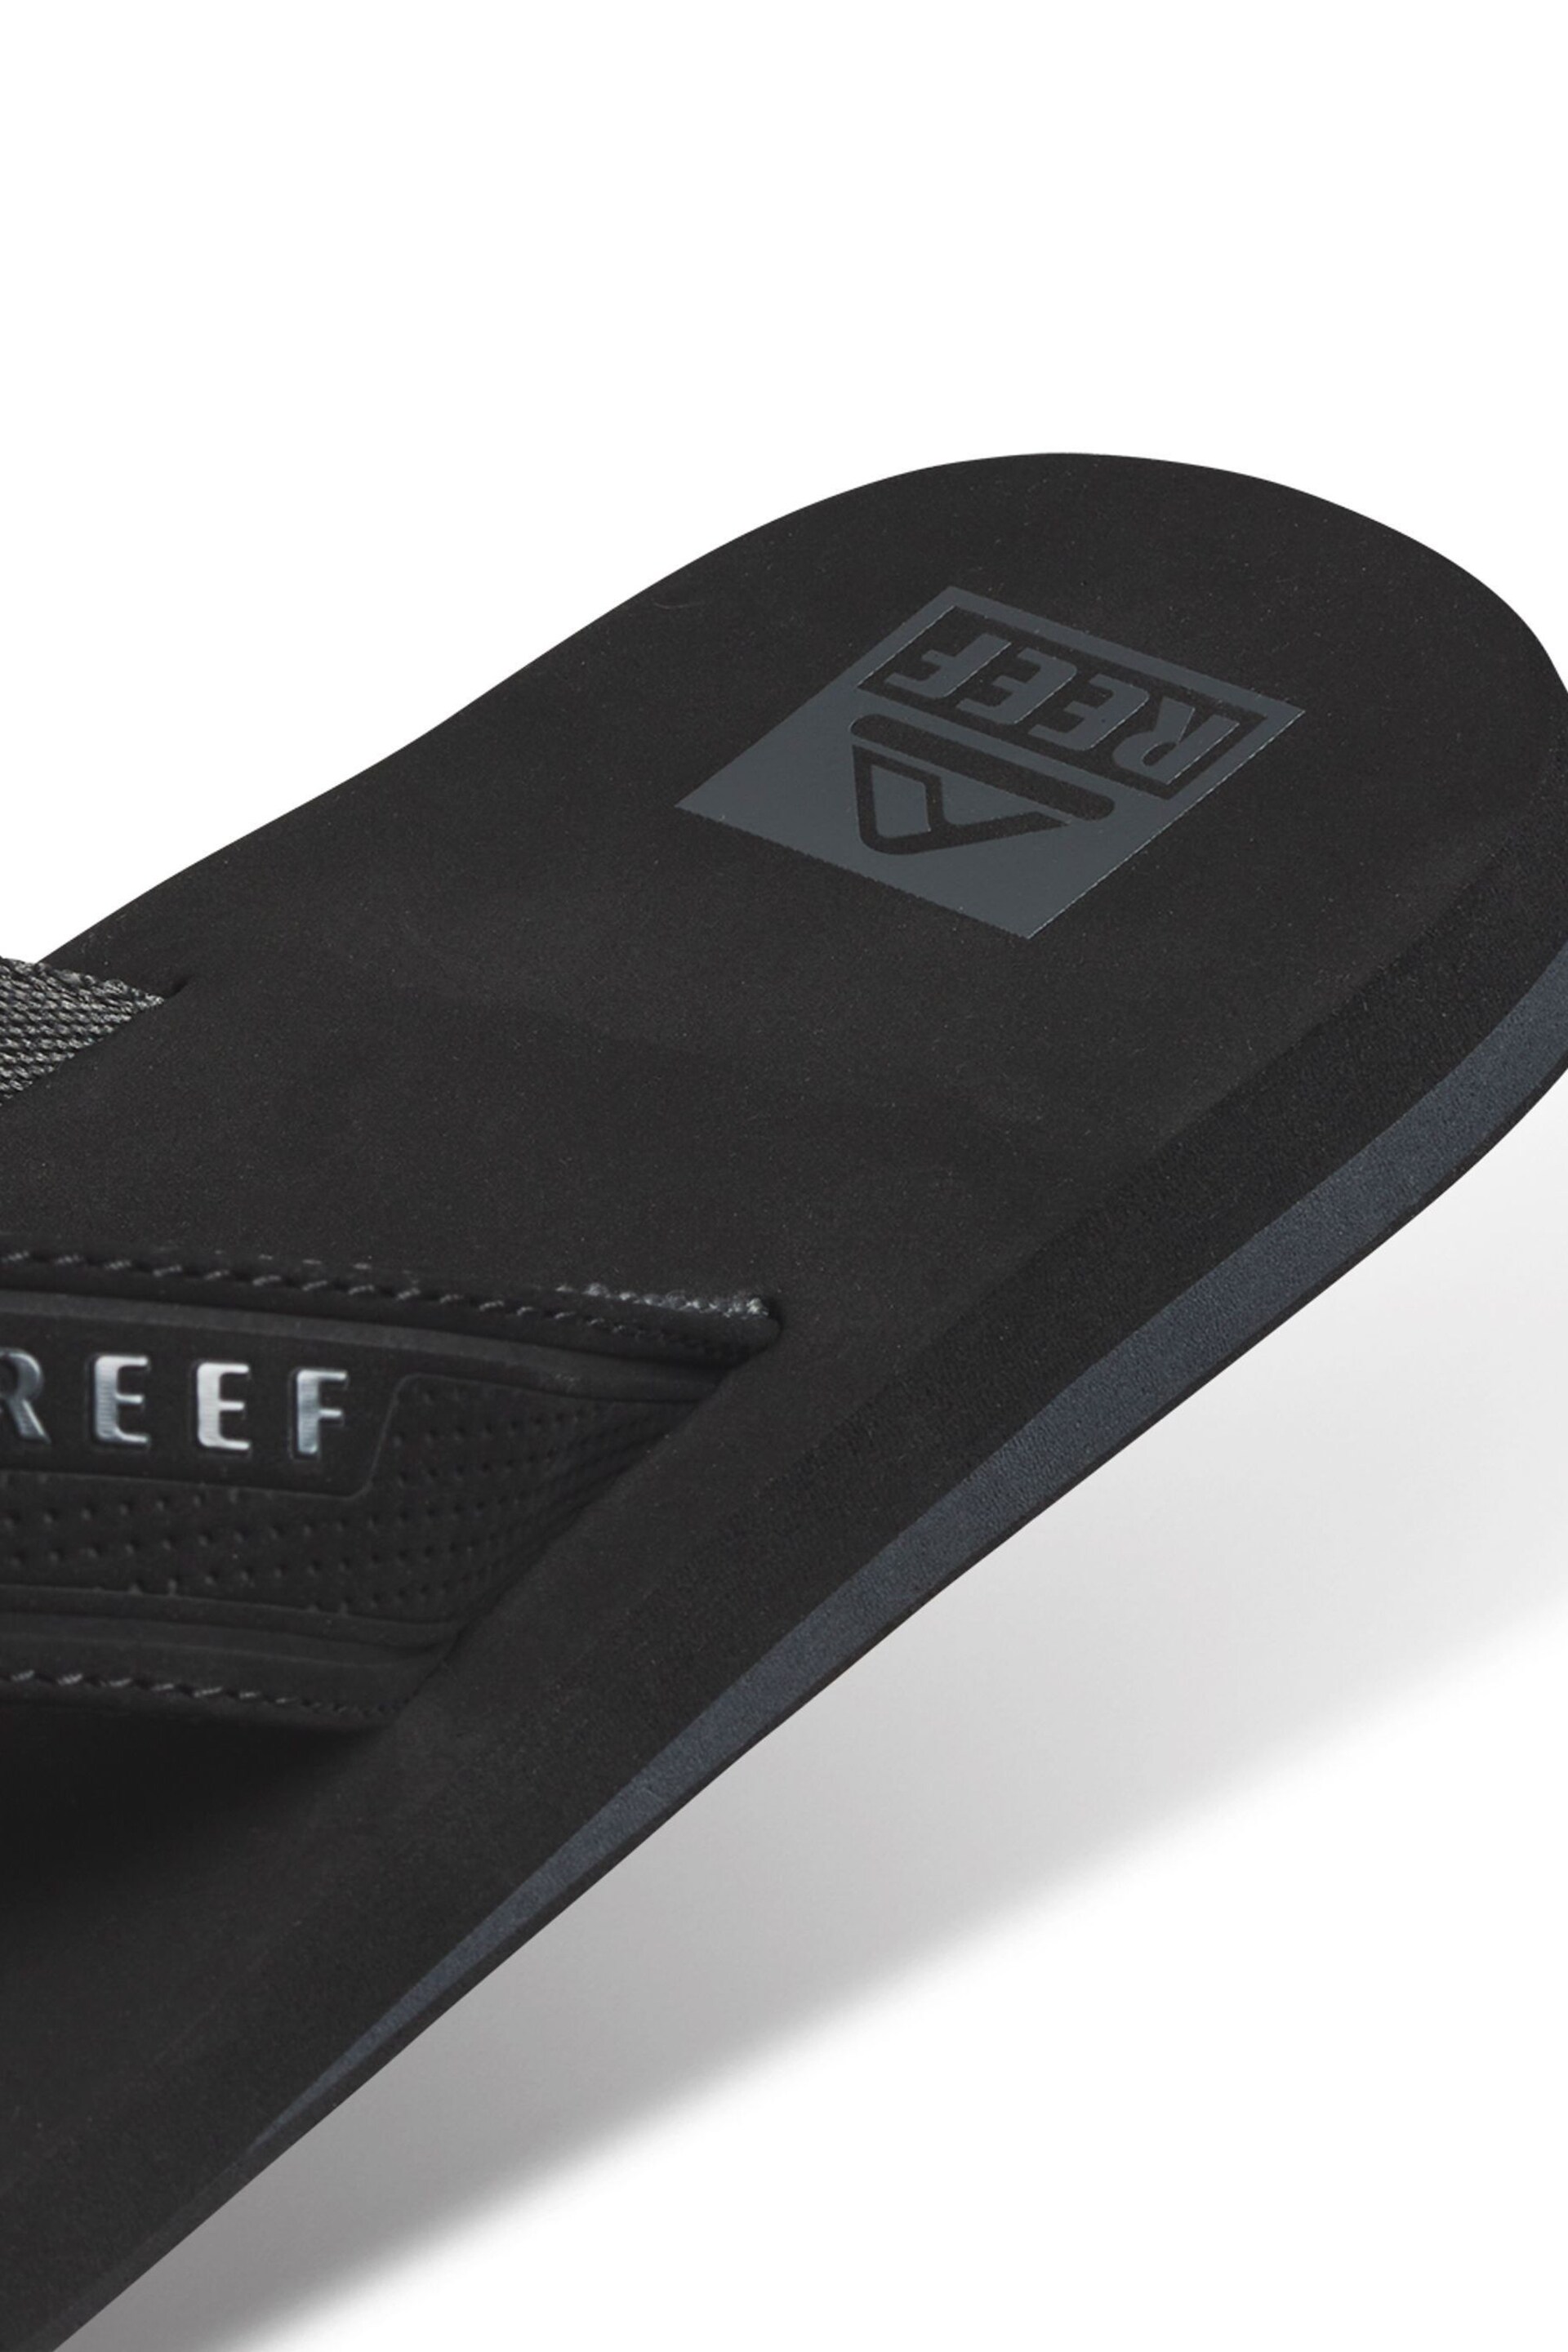 Reef The Layback Black Sandals - Image 5 of 6